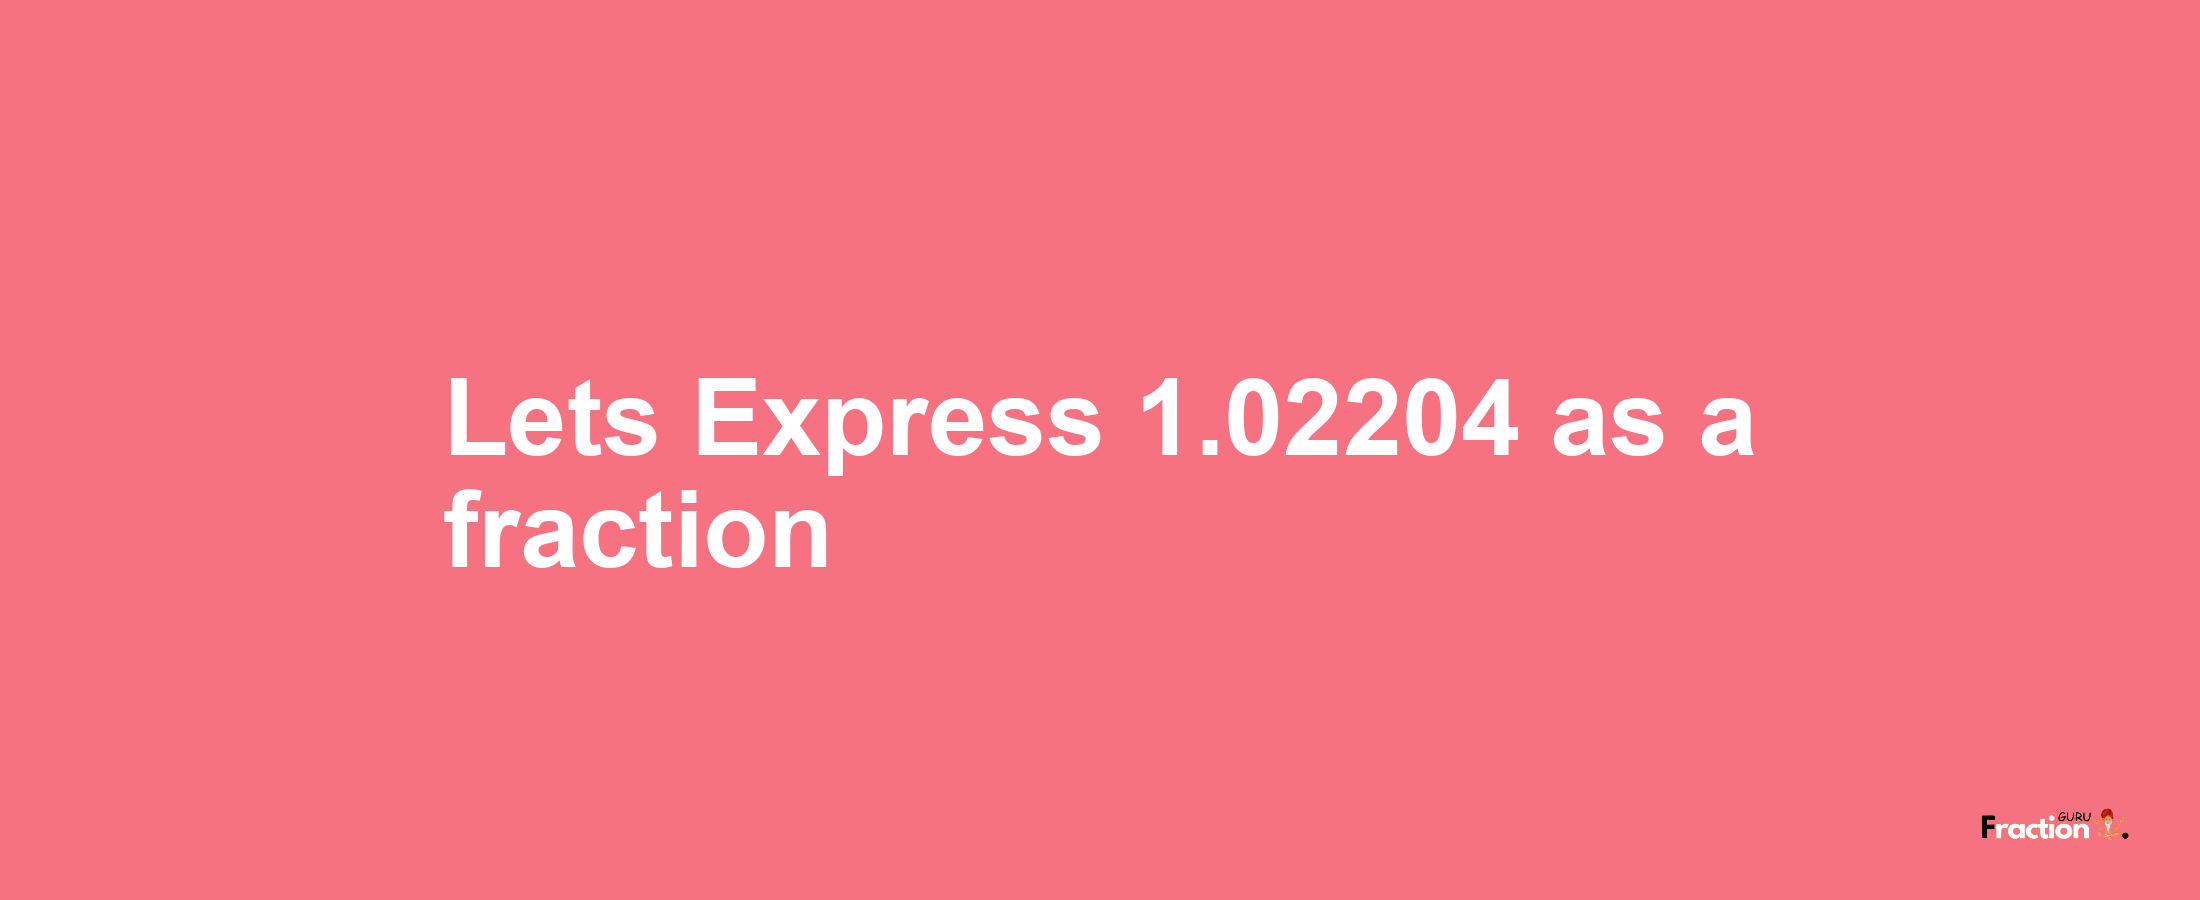 Lets Express 1.02204 as afraction